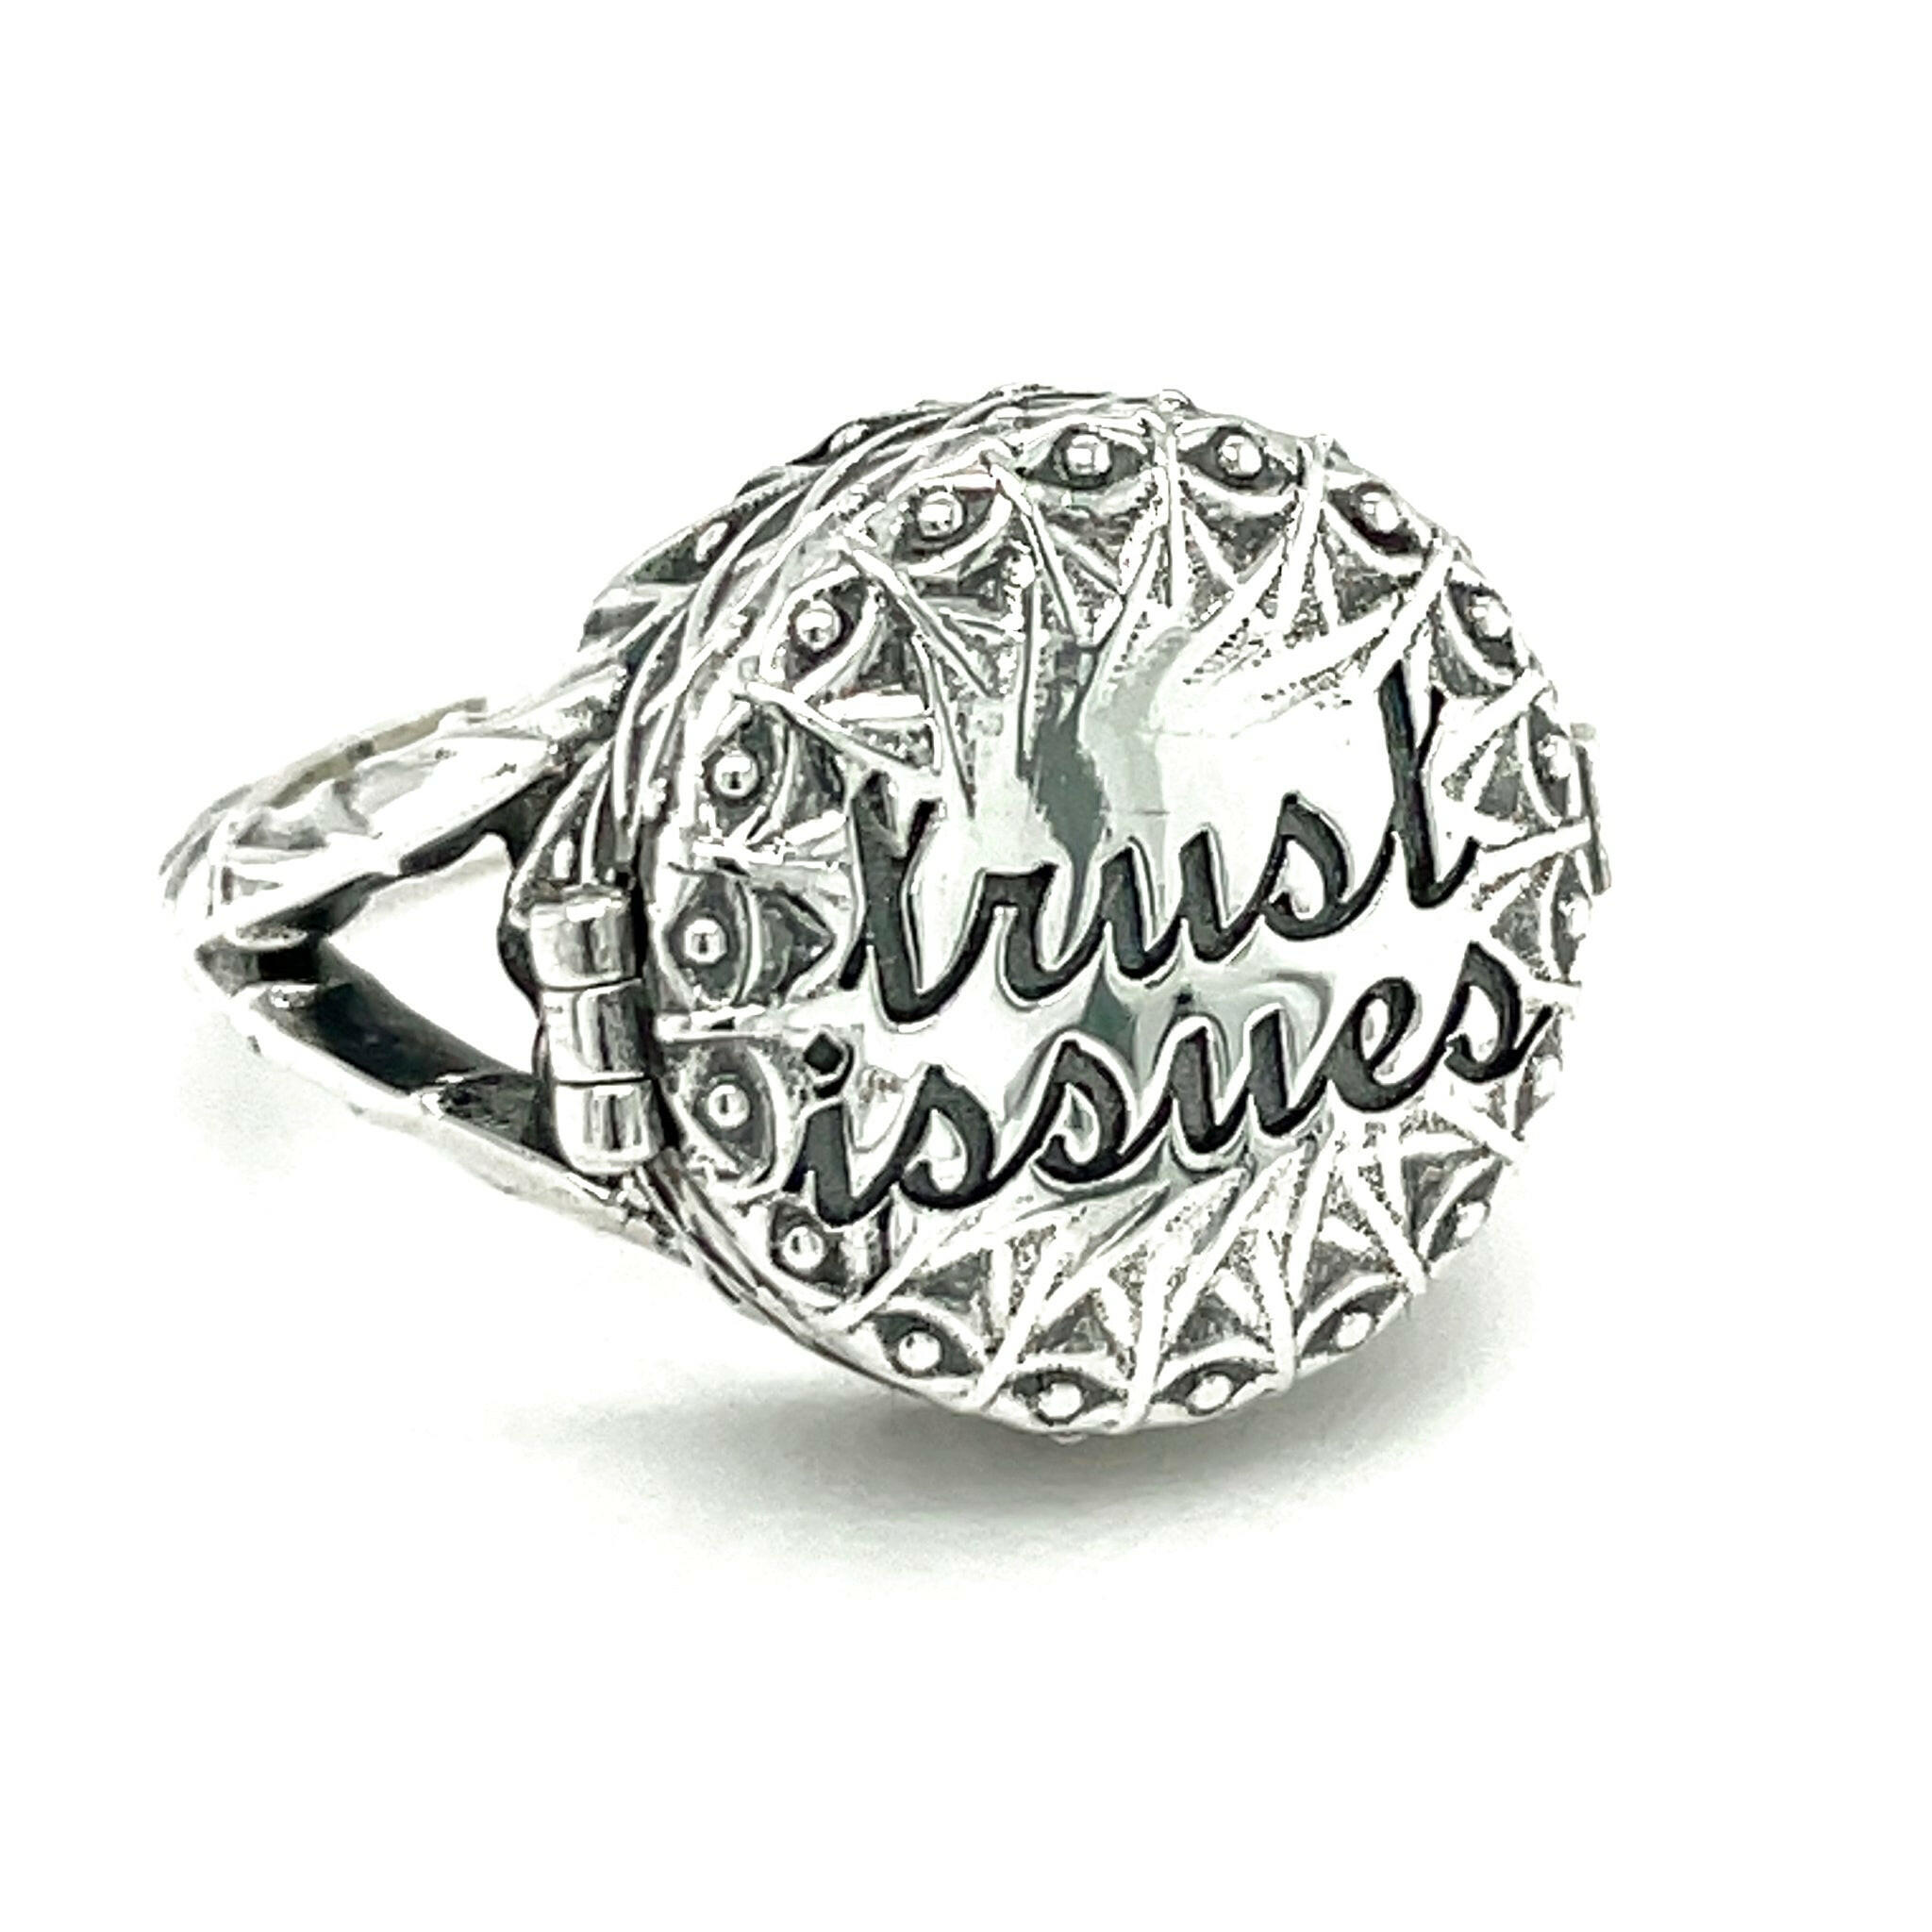 Trust Issues - Ilah Cibis Jewelry-Rings